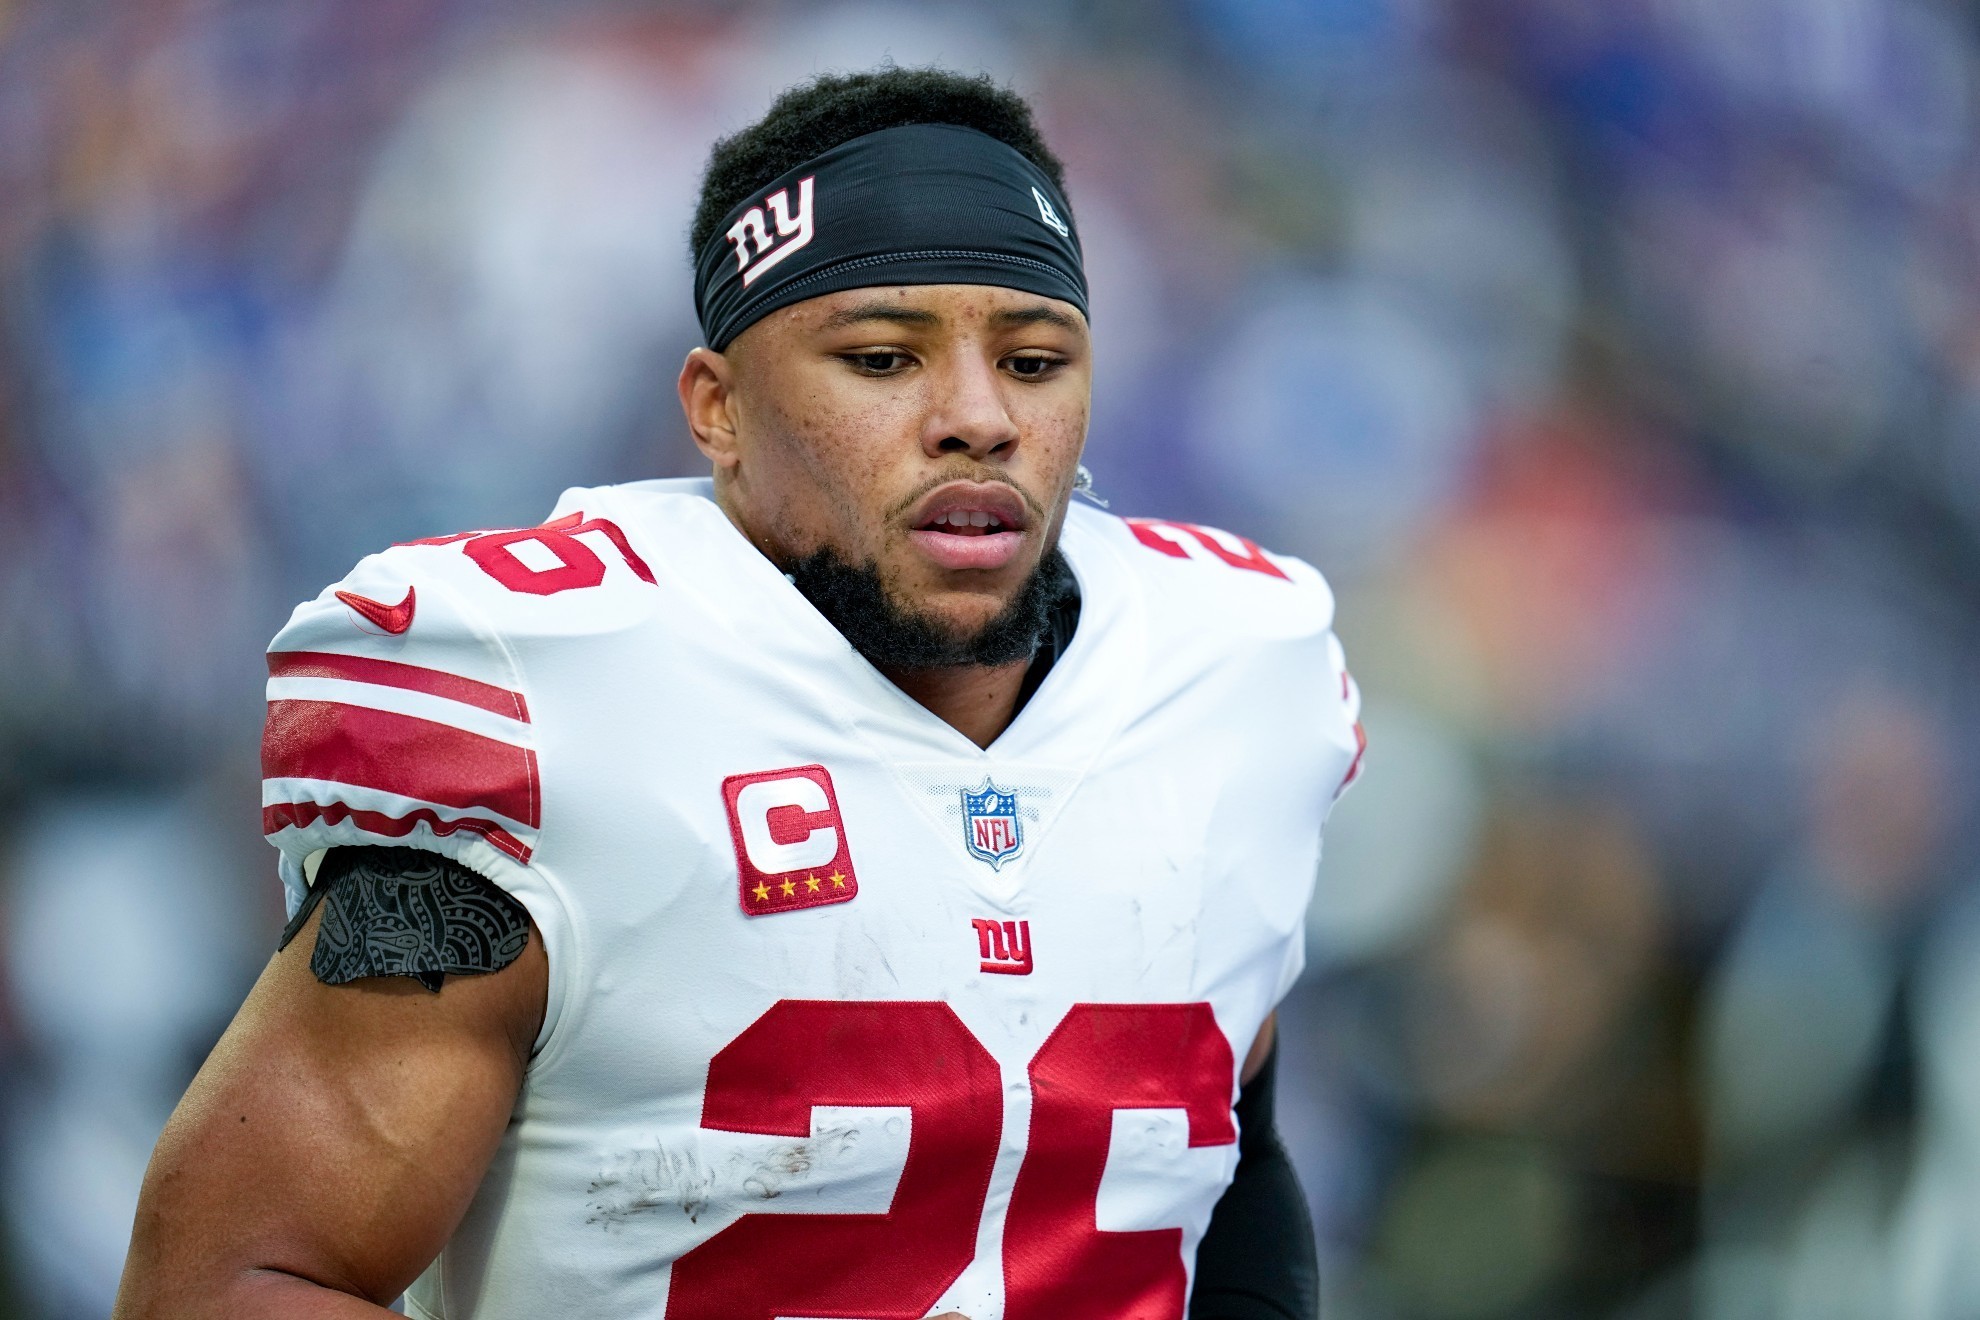 Saquon Barkley continues to face uncertain future with the New York Giants